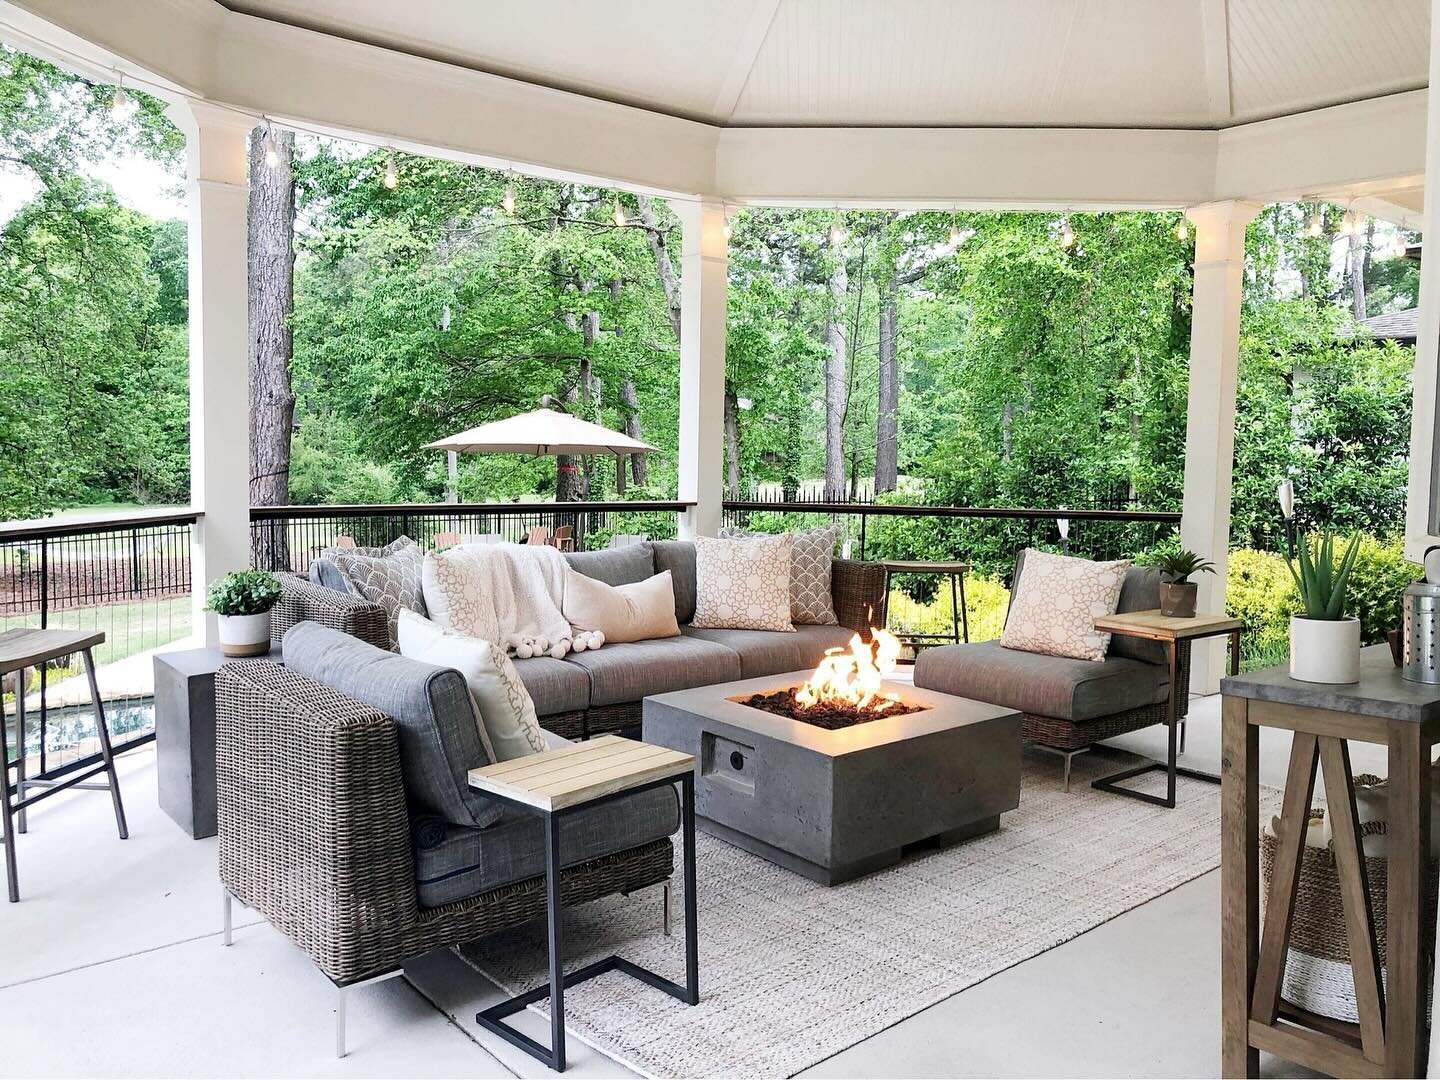 With Spring in bloom🌷, Summer around the corner and the temperatures getting warmer, outdoor entertaining is one of our favorite ways to enjoy the weather.☀️ Having an outdoor space as an extension of your home is the perfect way to enjoy the weathe